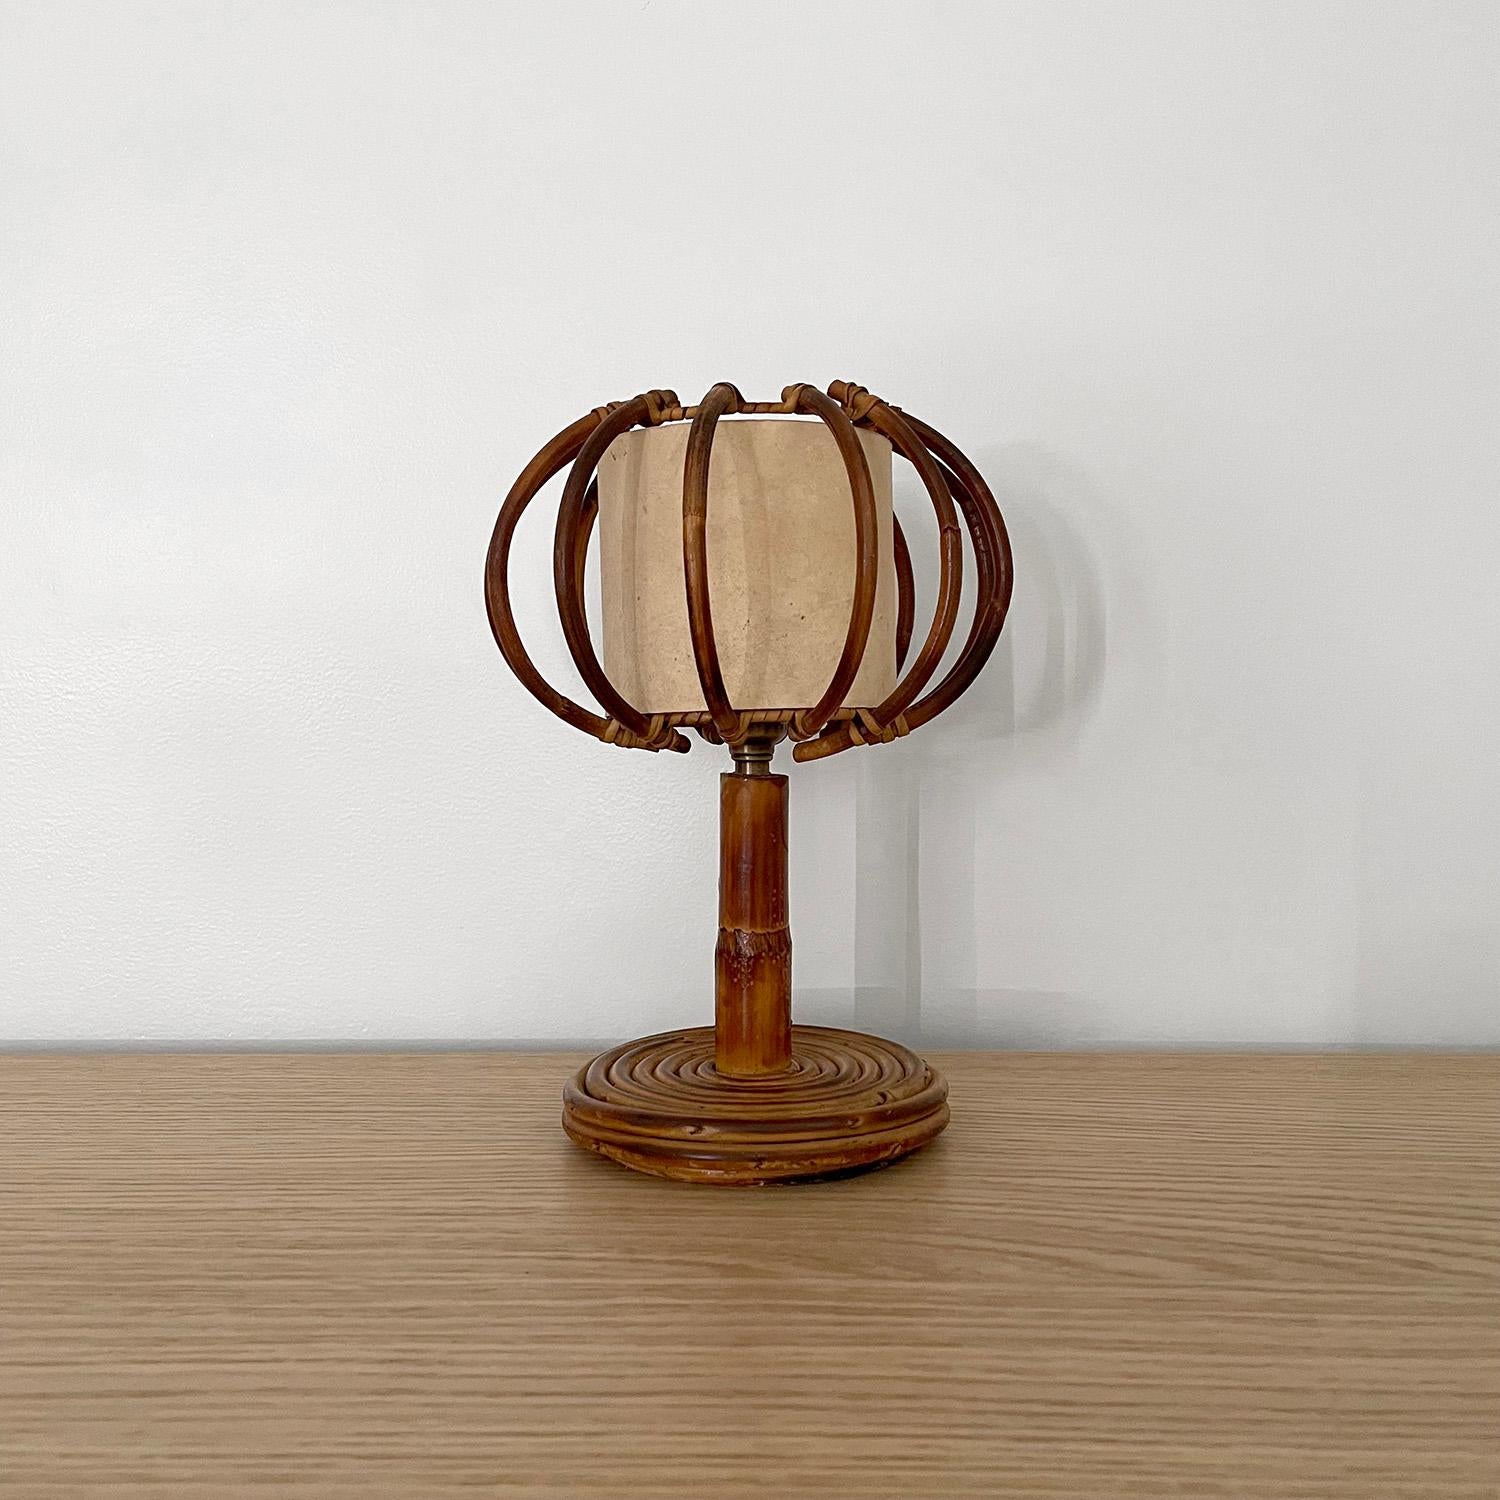 Louis Sognot French rattan lamp 
France, 1960s
Unique orb shade
Circular rattan base 
Patina from age and use
Newly rewired 
Single socket candelabra base 

We have a large selection of superb vintage lighting 
Please see other listings 